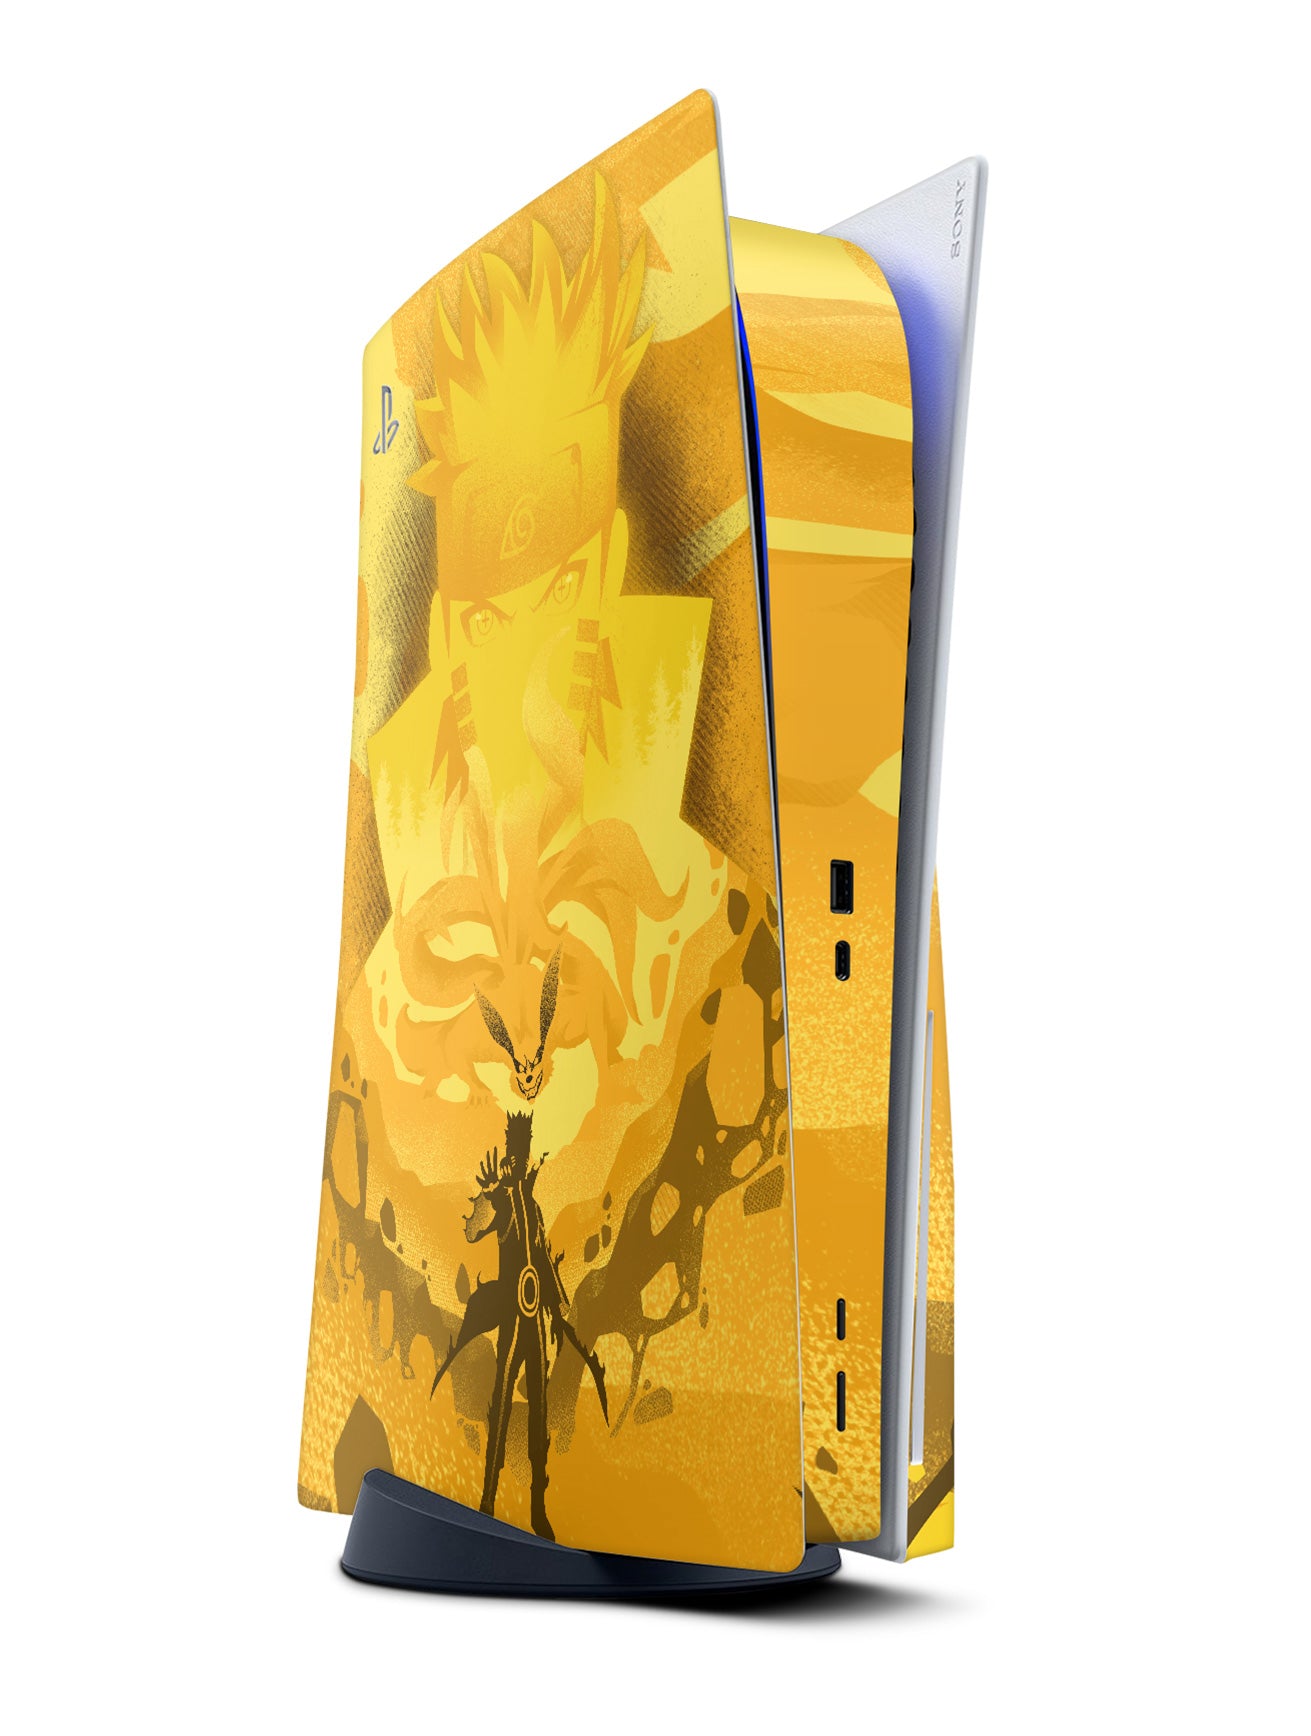 Golden Skin Kit By System Skins - Compatible With Playstation 5